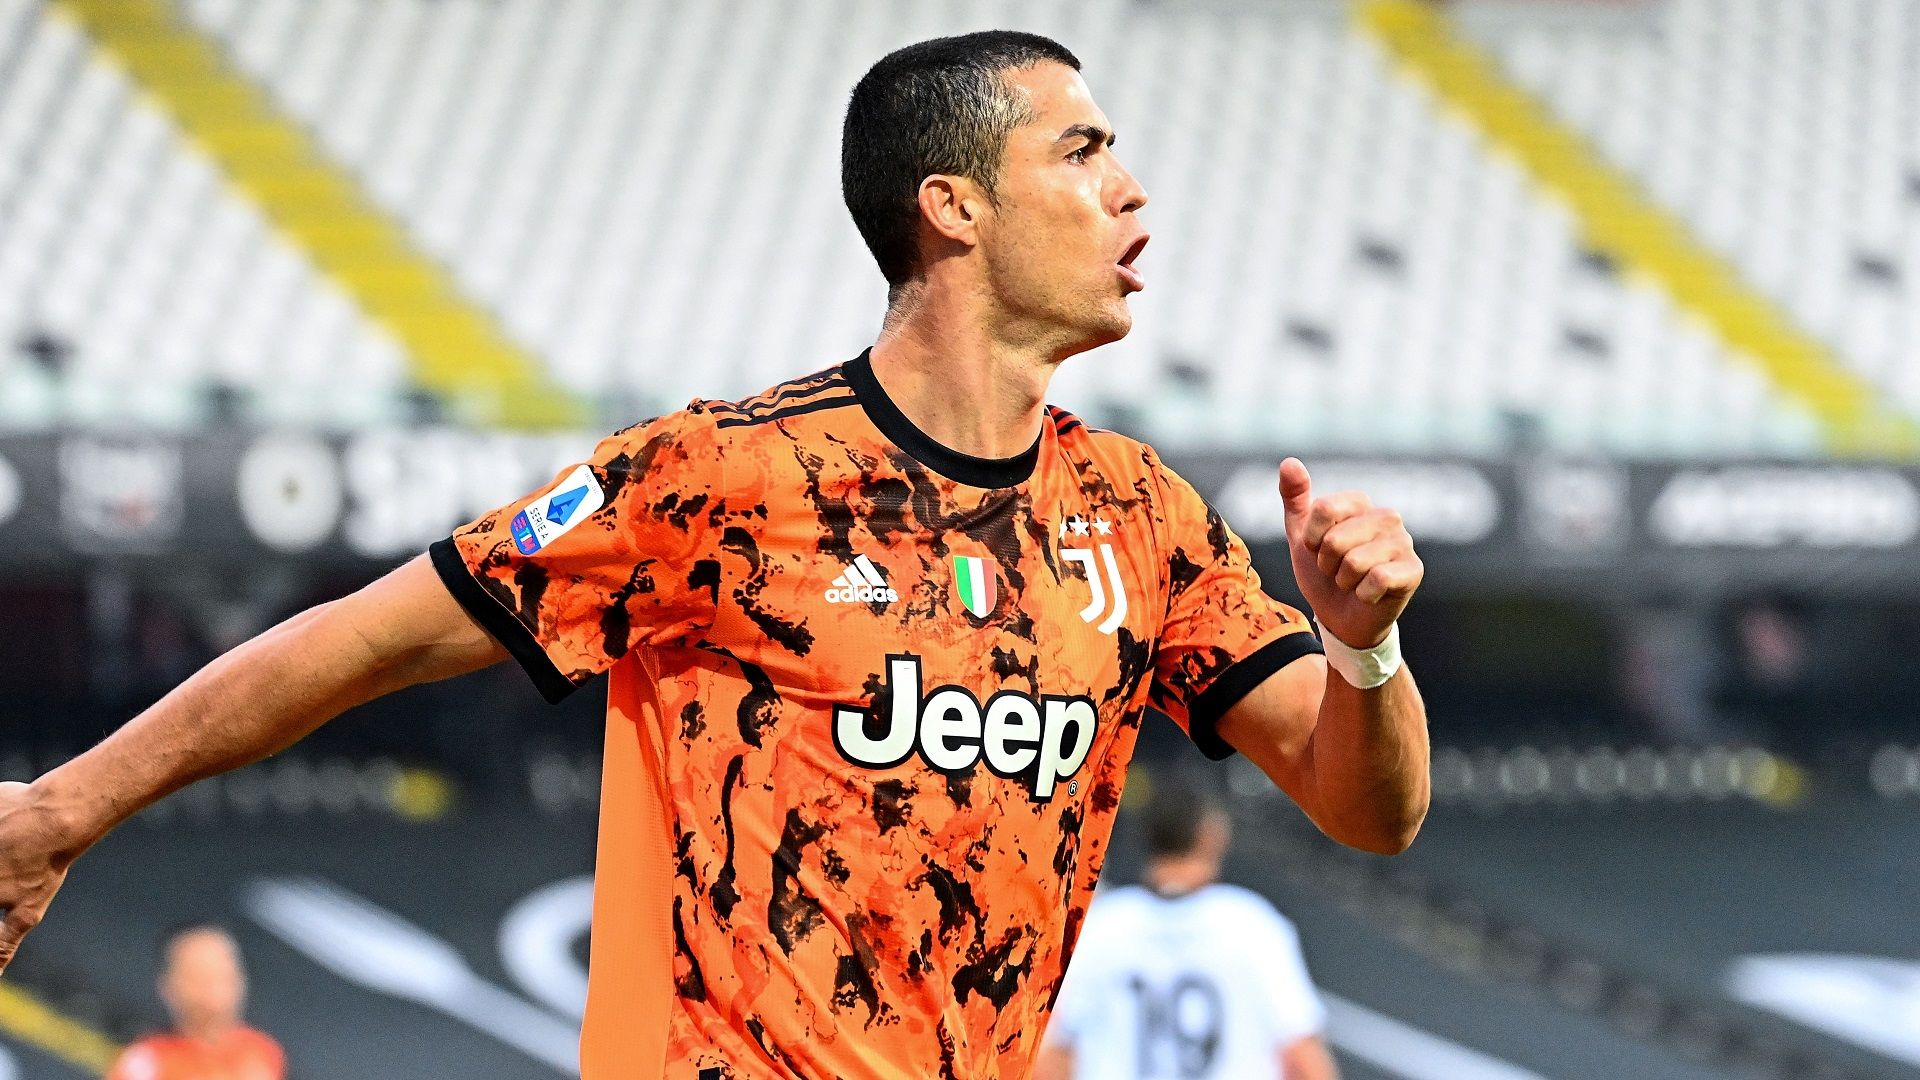 Ronaldo Set To Make First Champions League Appearance Of 2020 21 Season After Being Named In Juventus Squad